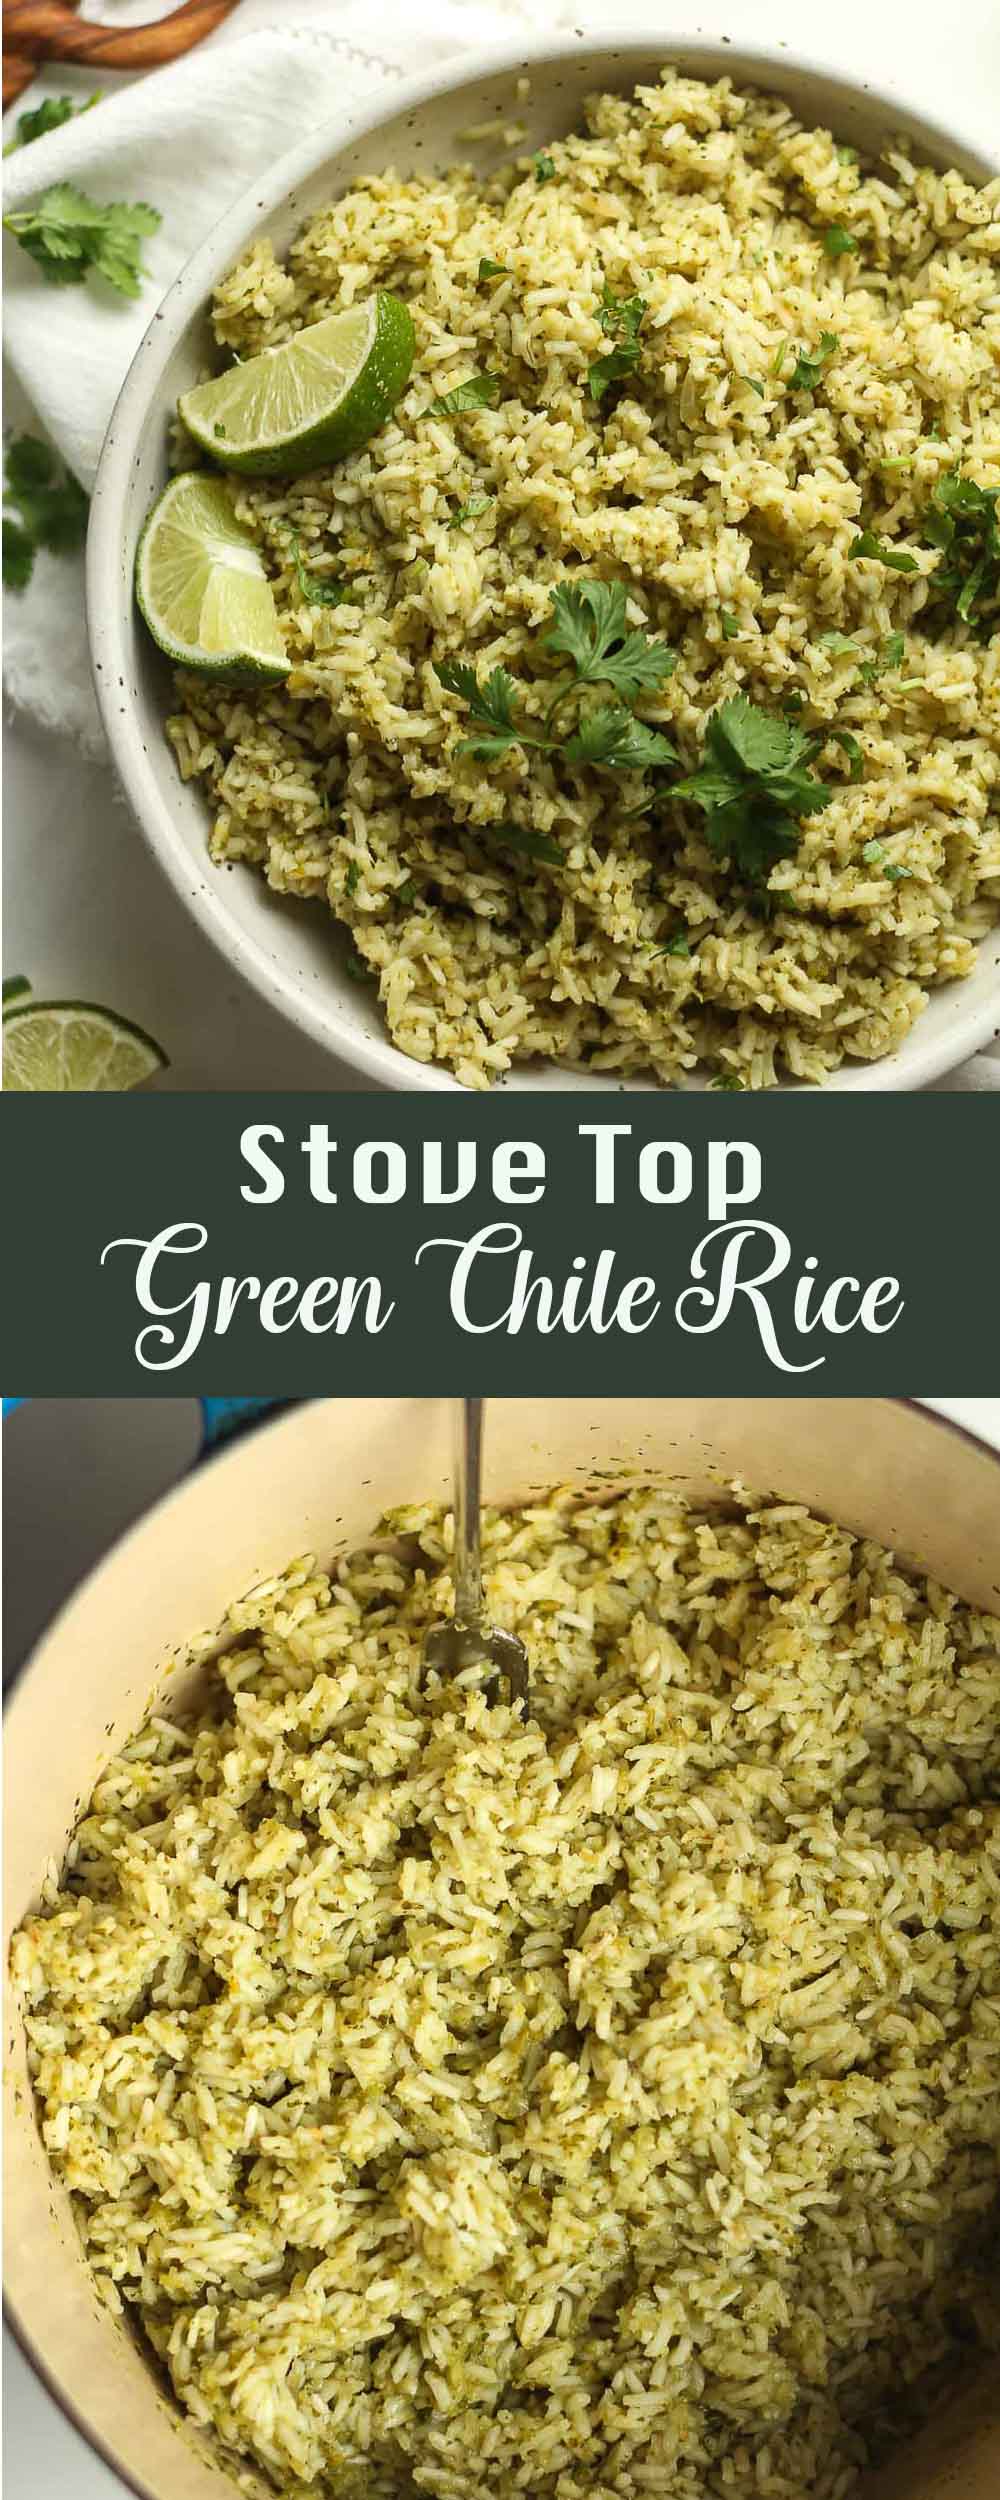 A collage of photos of stove top green Chile rice.